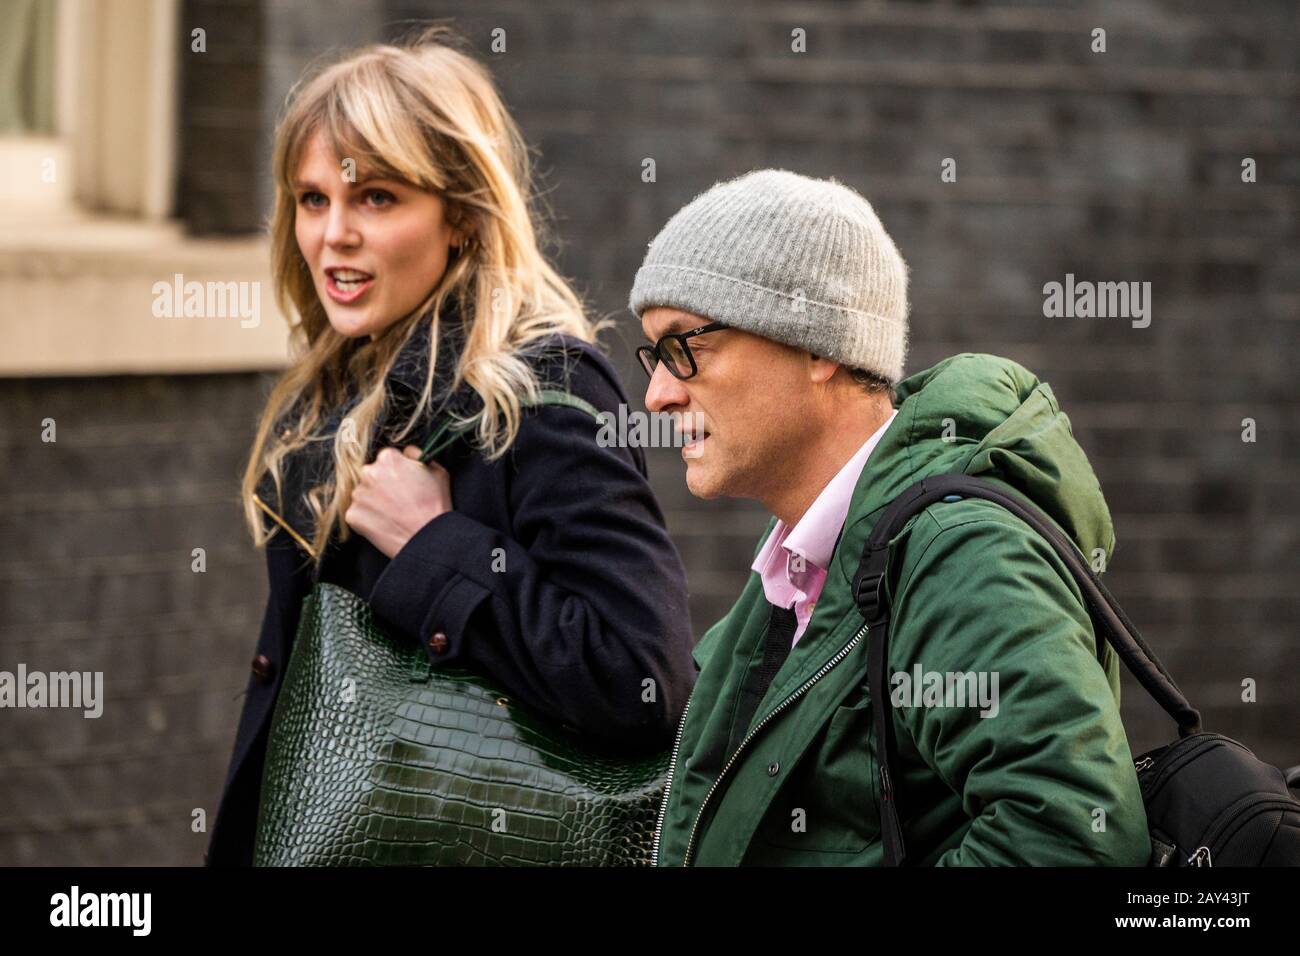 London, UK. 14th Feb, 2020. Dominic Cummings - Ministers arrive for the first Cabinet Meeting after the Boris Johnson's reshuffle, Downing Street. Credit: Guy Bell/Alamy Live News Stock Photo